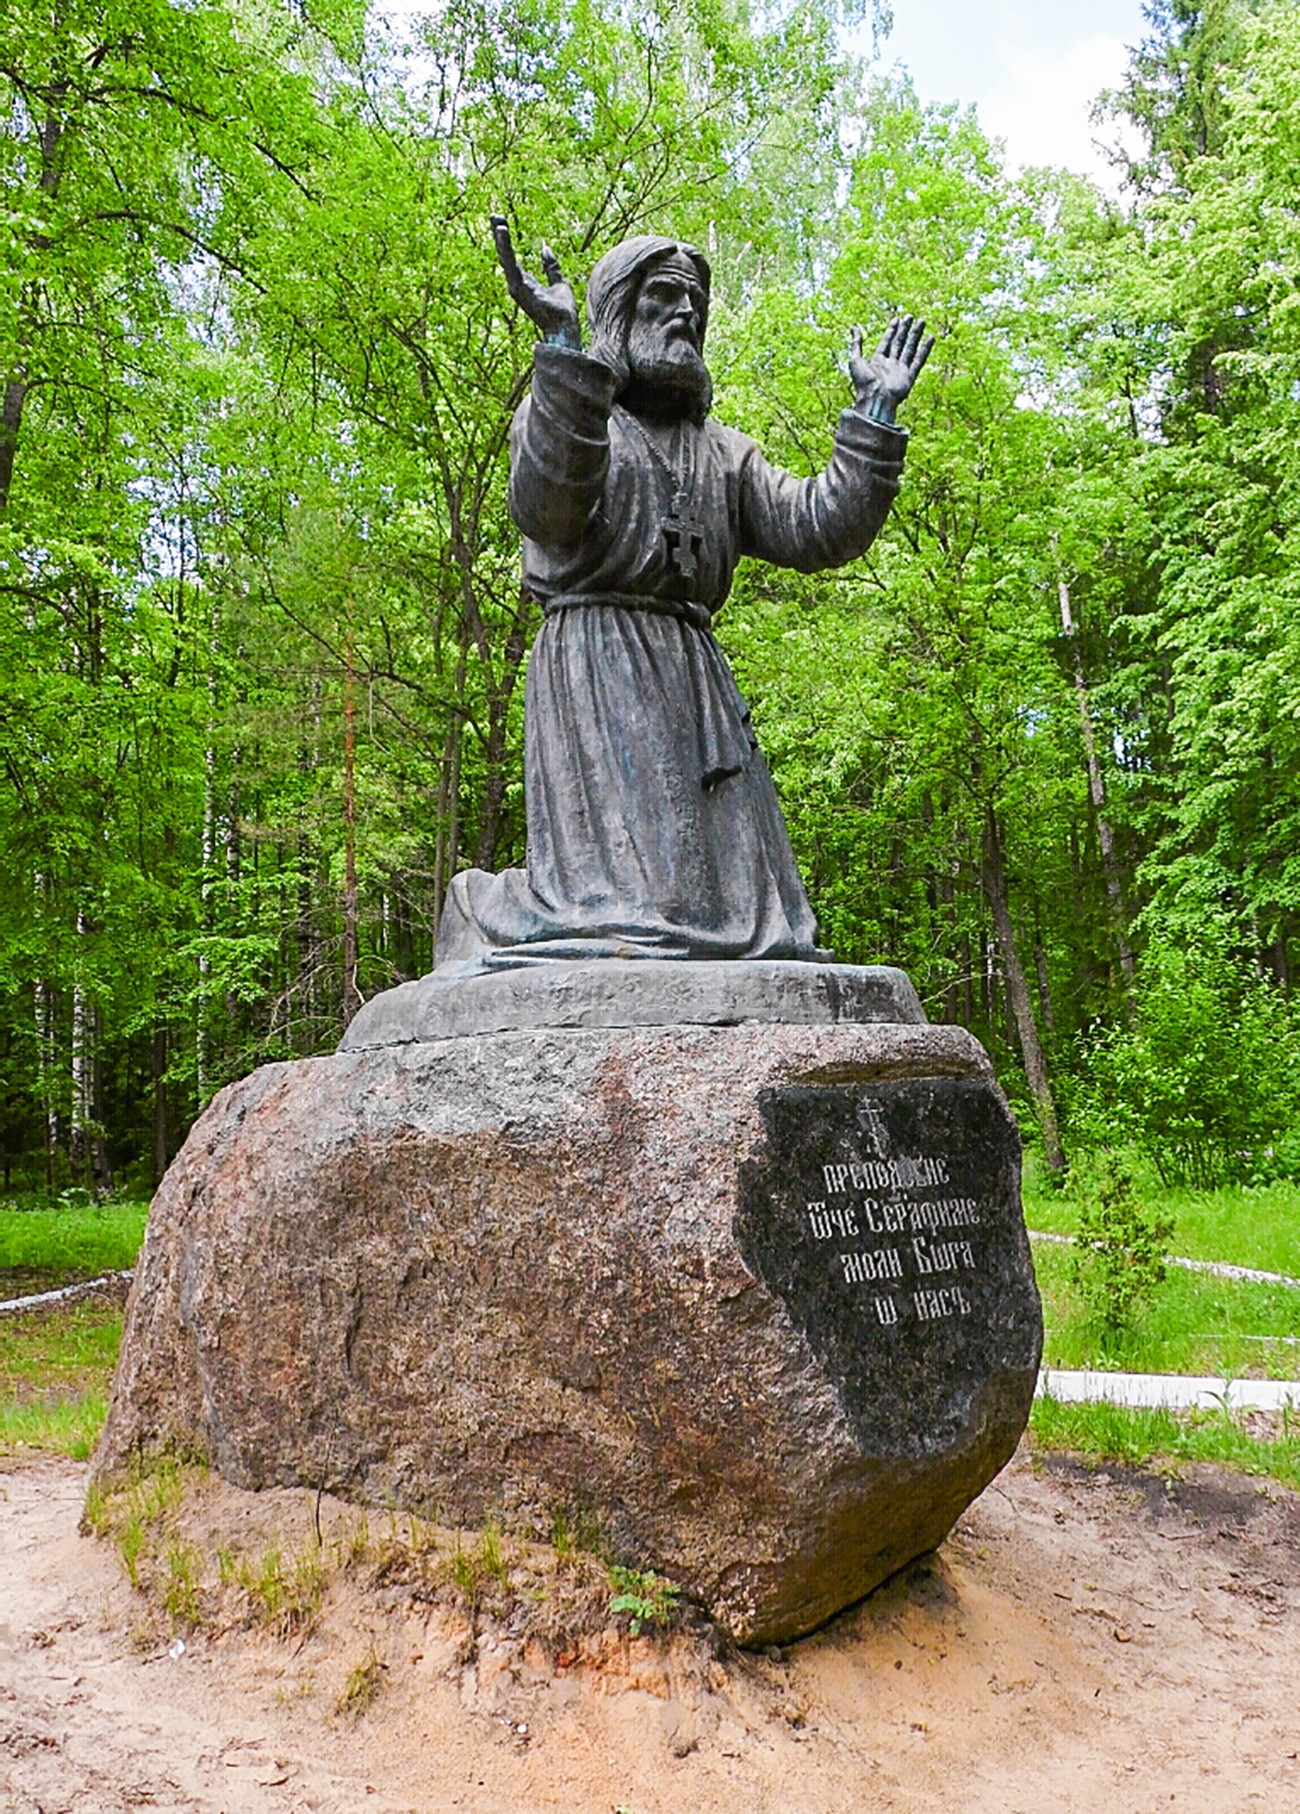 A monument to Saint Seraphim of Sarov standing on a stone